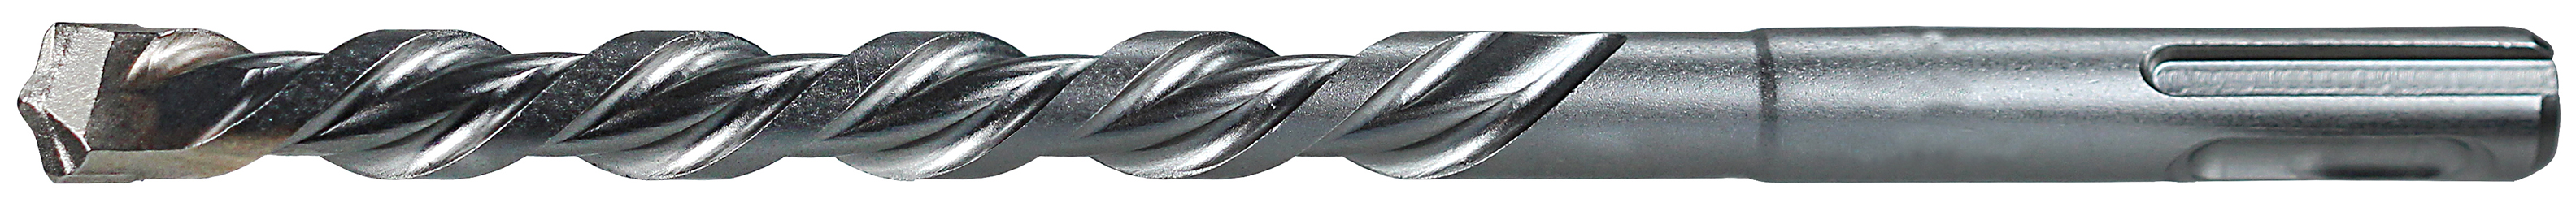 Rotary Hammer Drill Bit, 7/32 in. bit diameter, 8-1/4 in. overall length, Straight shank type, 3 flutes, Tip-Carbide material, 6 in. drilling depth